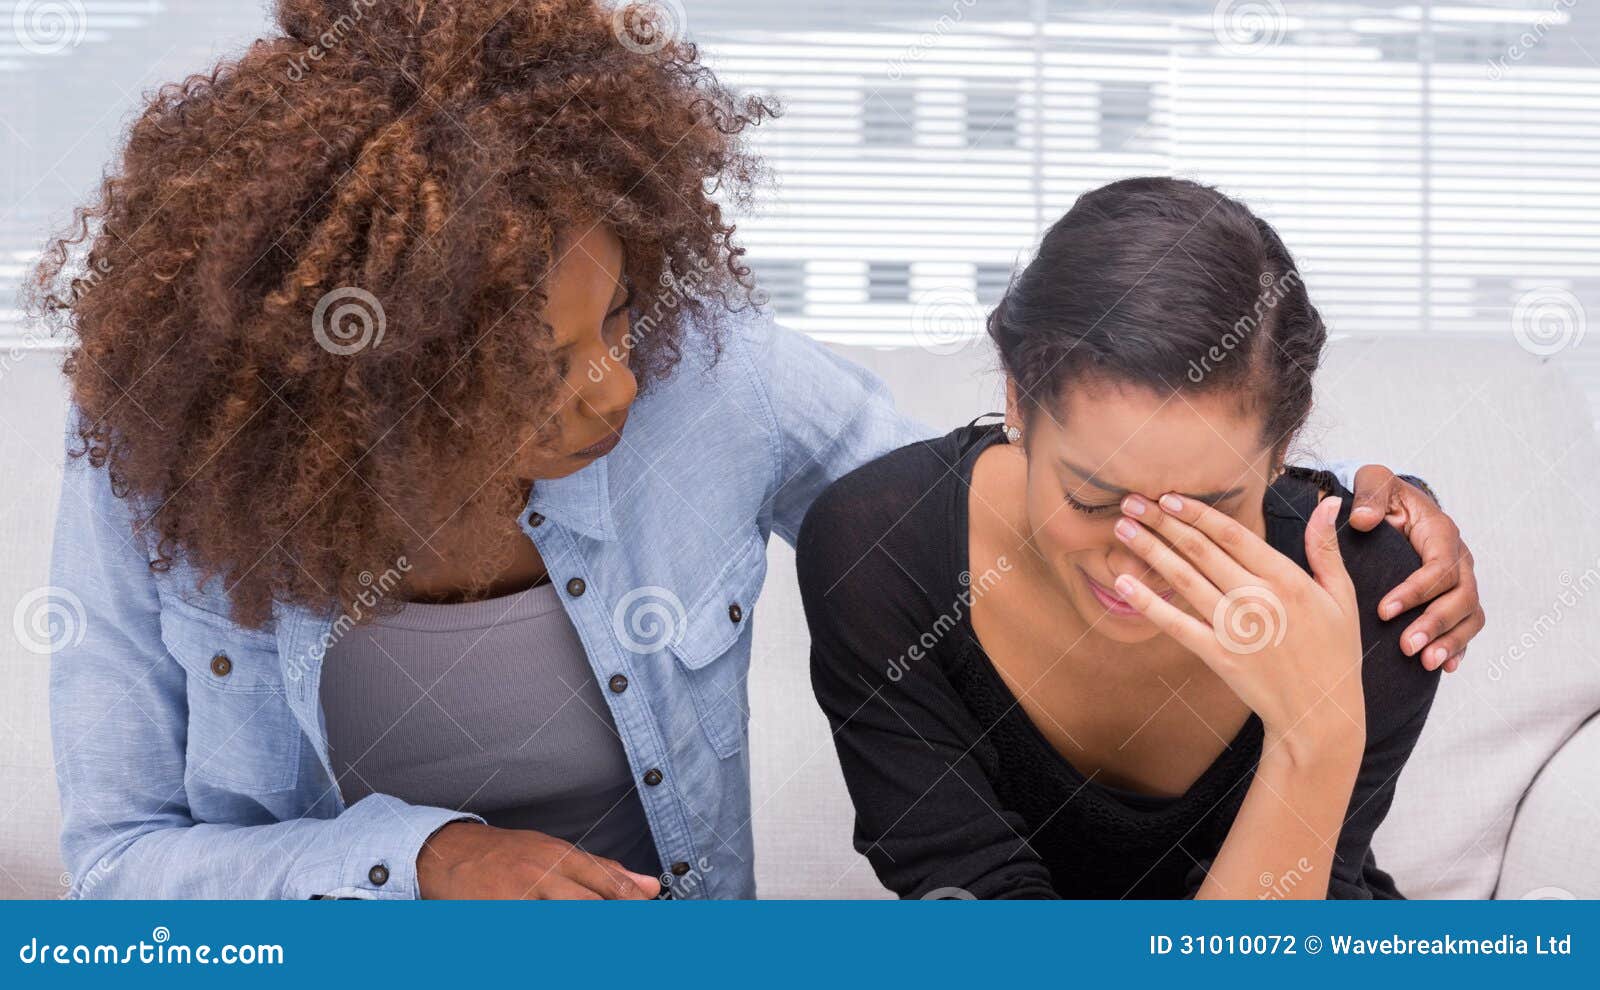 sad woman crying next to her therapist